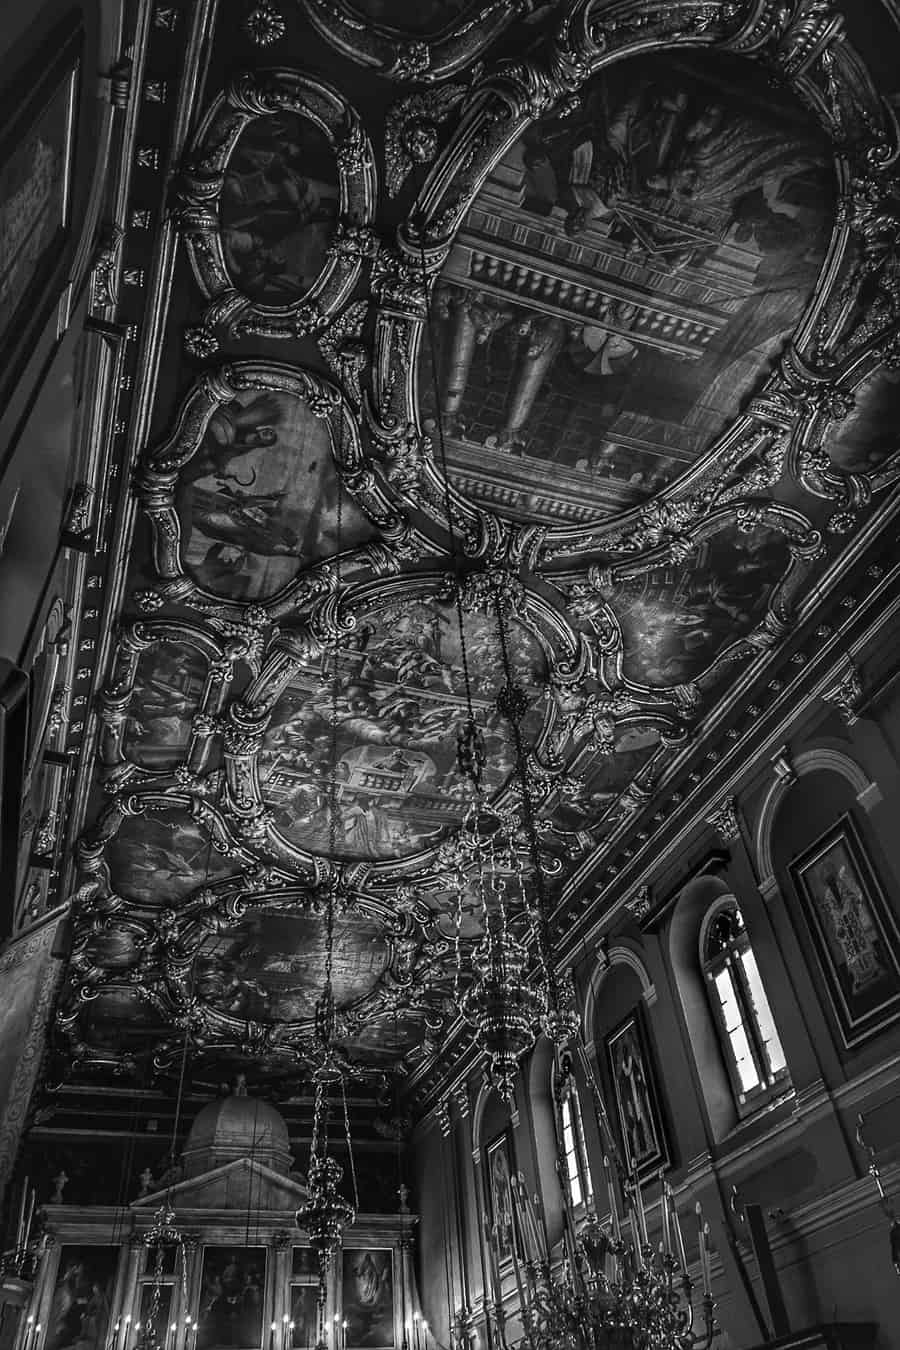  Church ceiling - black and white interior photography by Rick McEvoy 